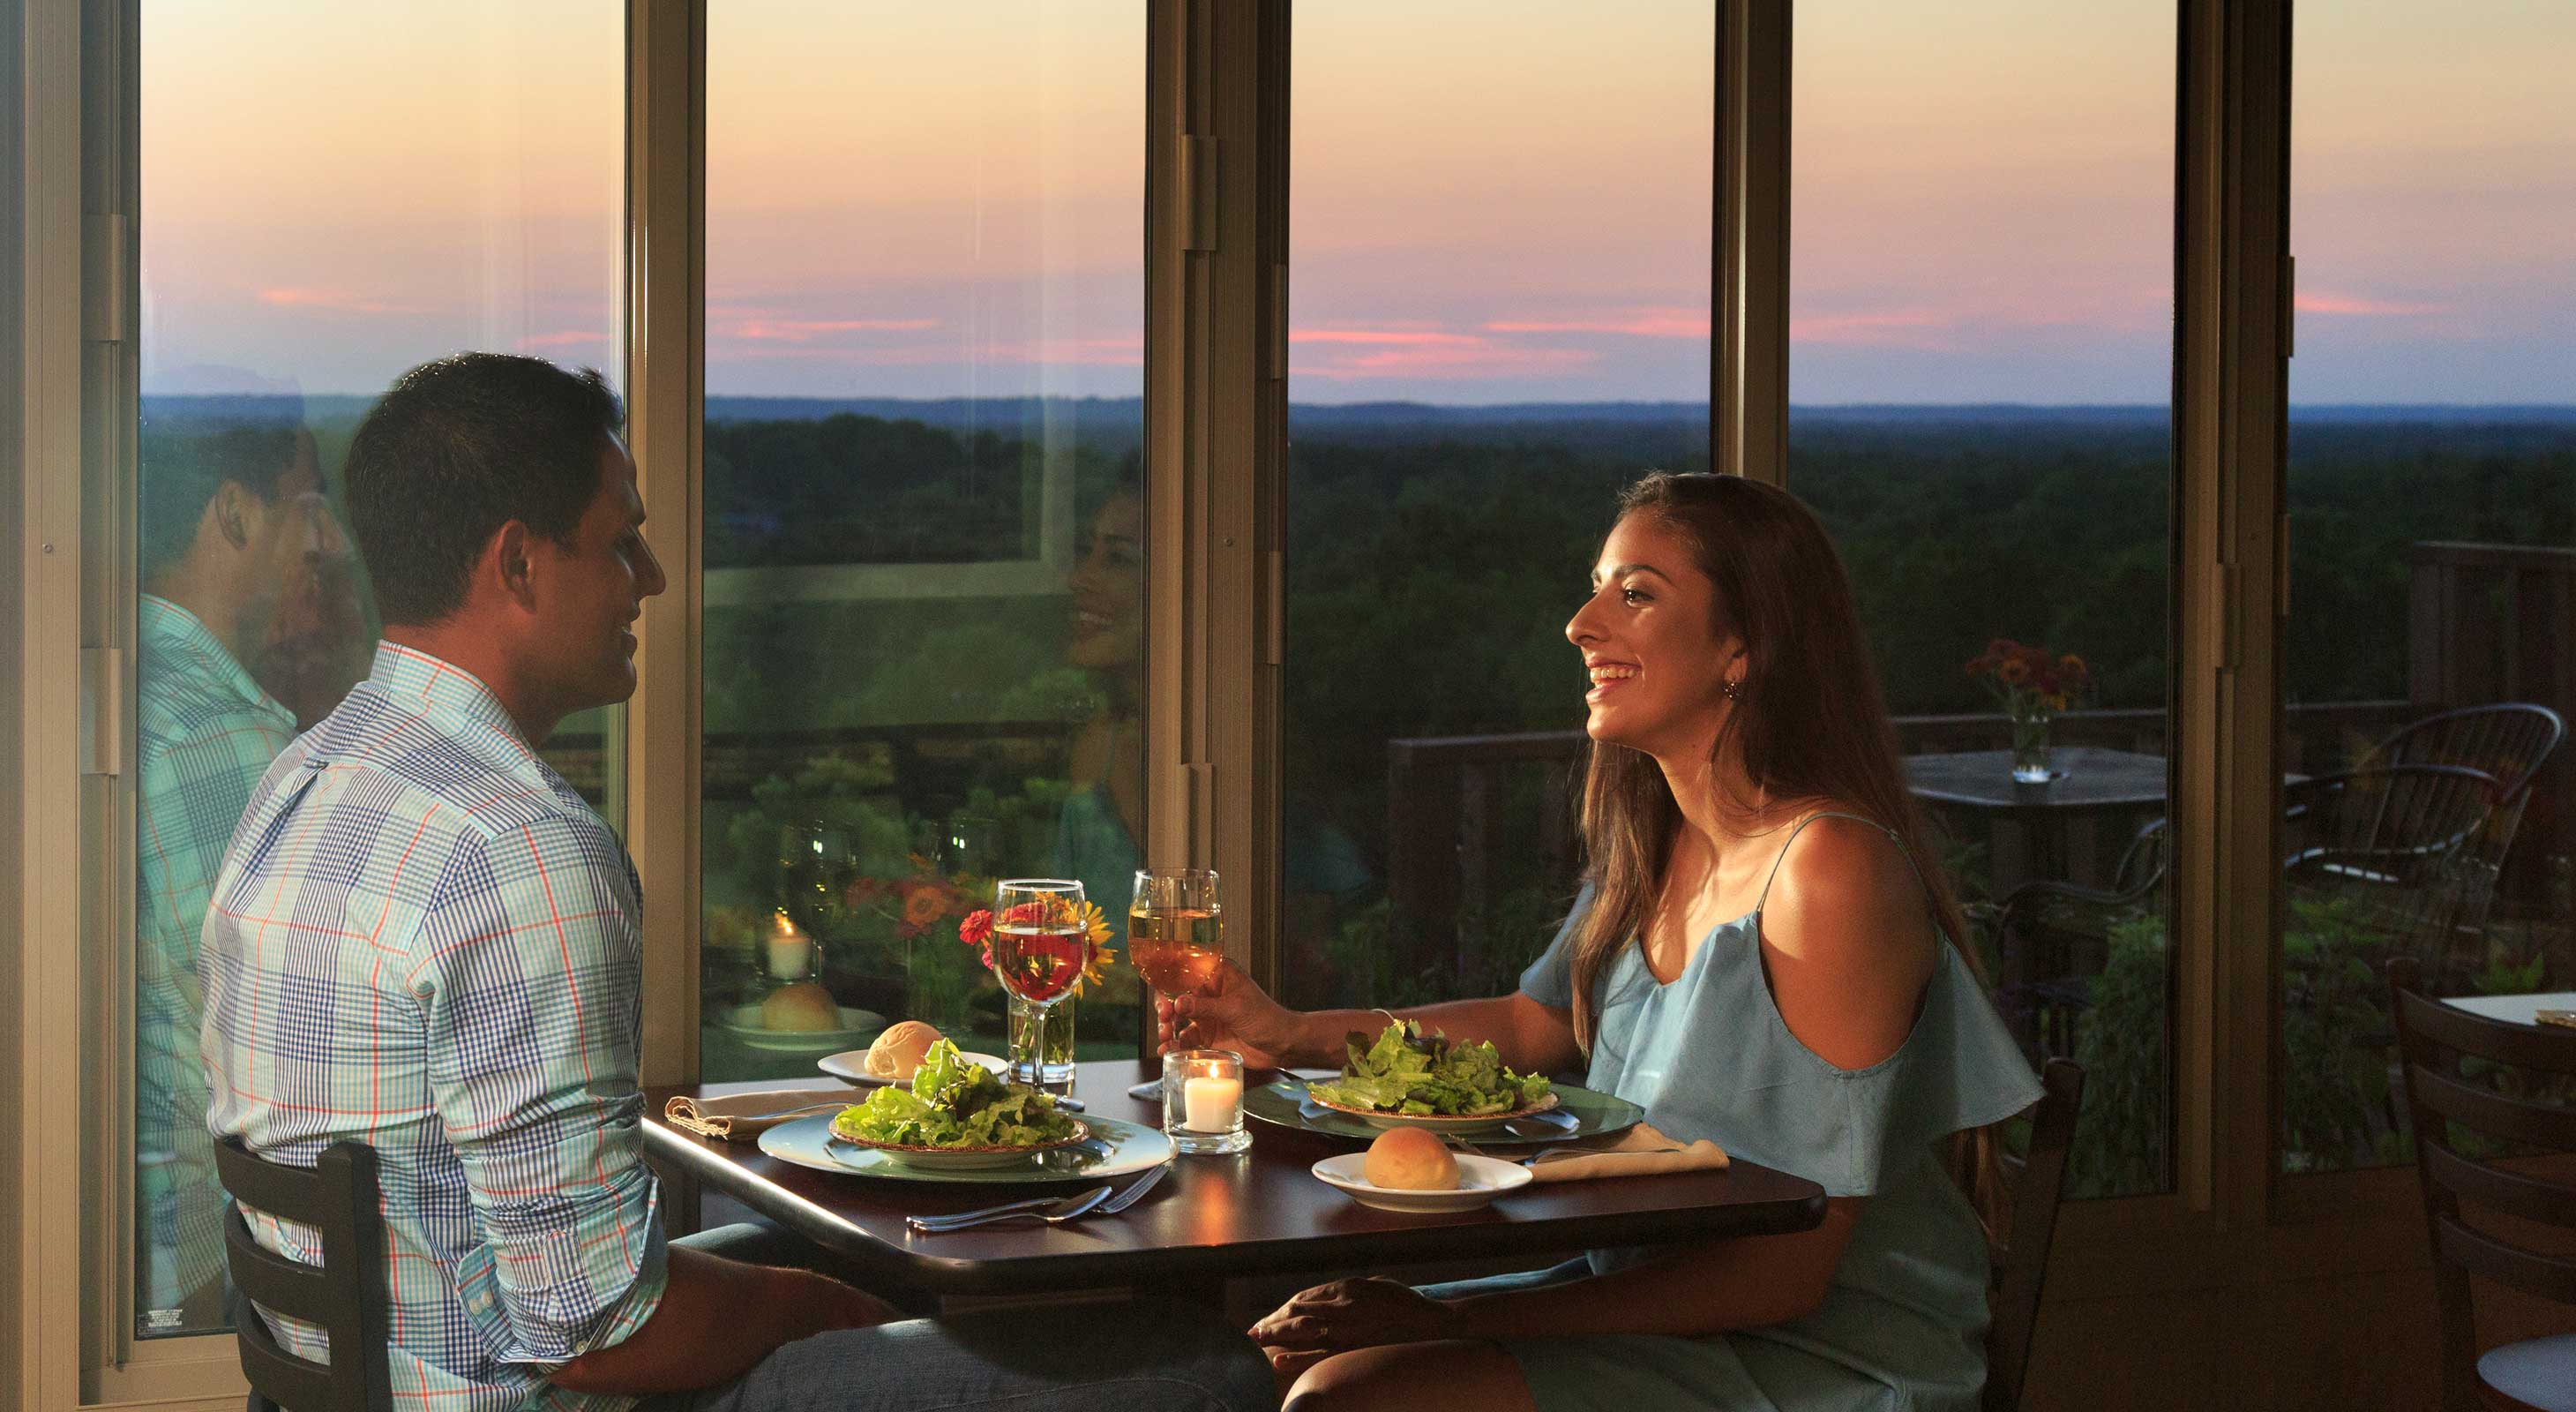 Couple enjoying dinner at sunset with a view at Pleasanton, KS restaurant